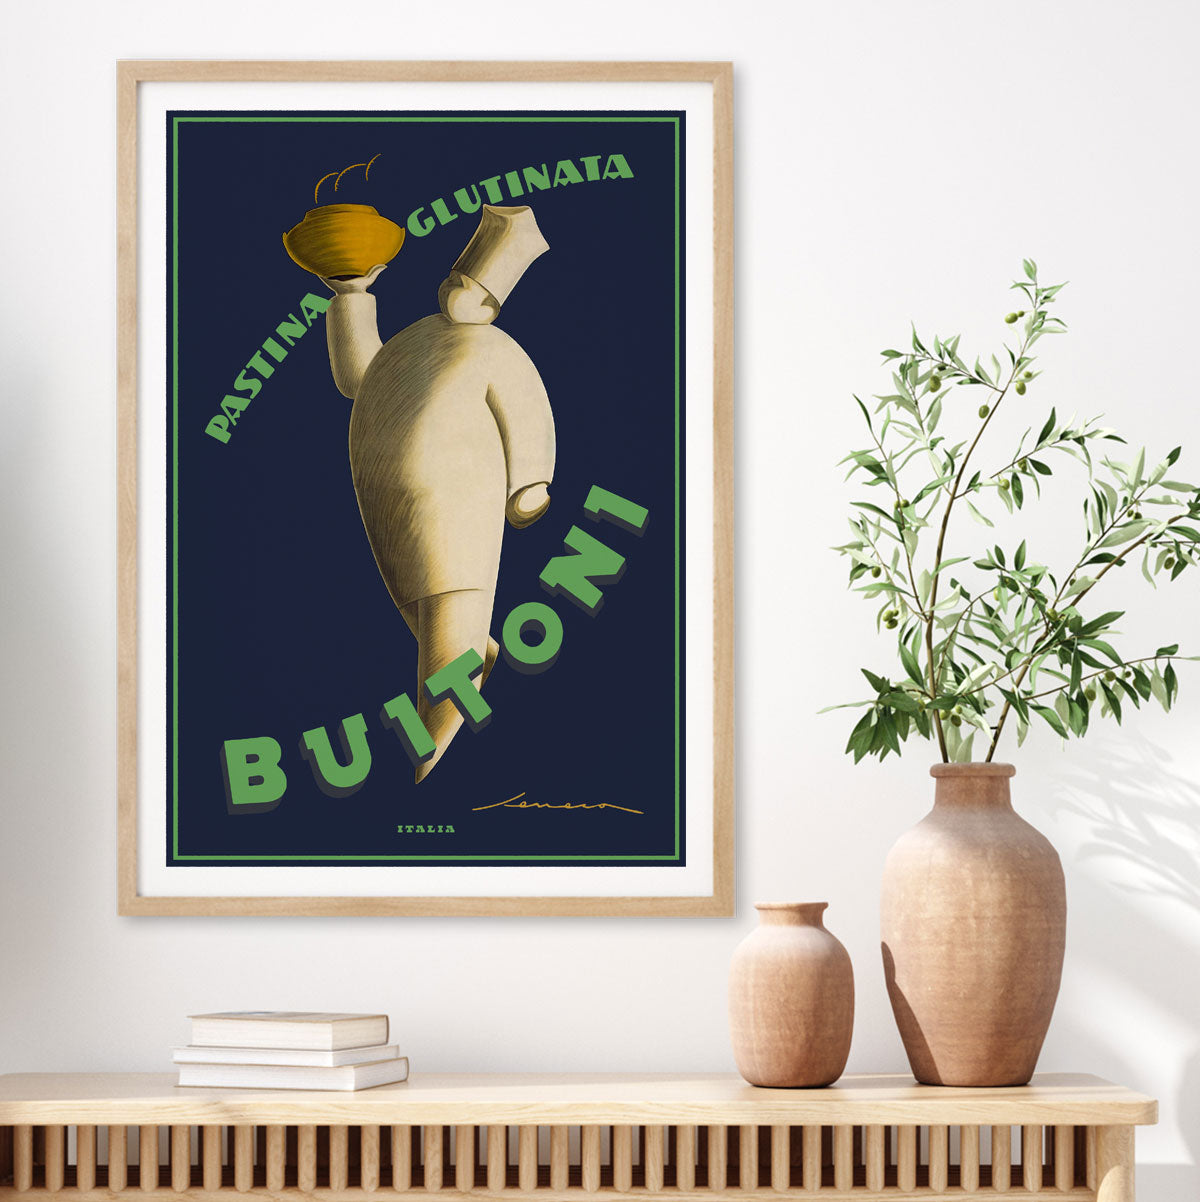 Buitoni Italy retro vintage advertising poster from Places We Luv